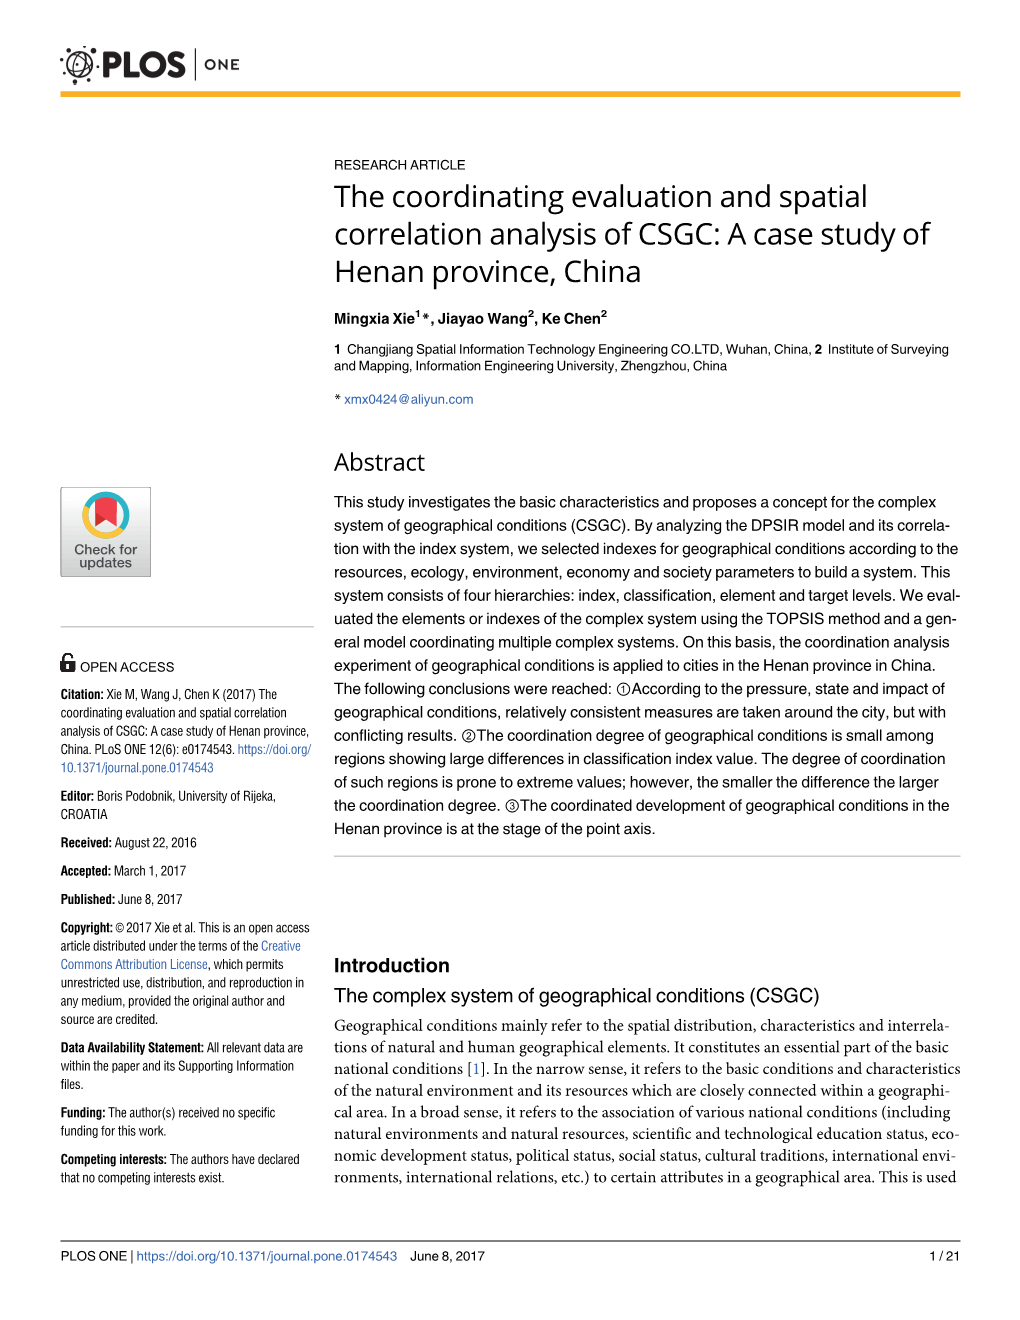 The Coordinating Evaluation and Spatial Correlation Analysis of CSGC: a Case Study of Henan Province, China